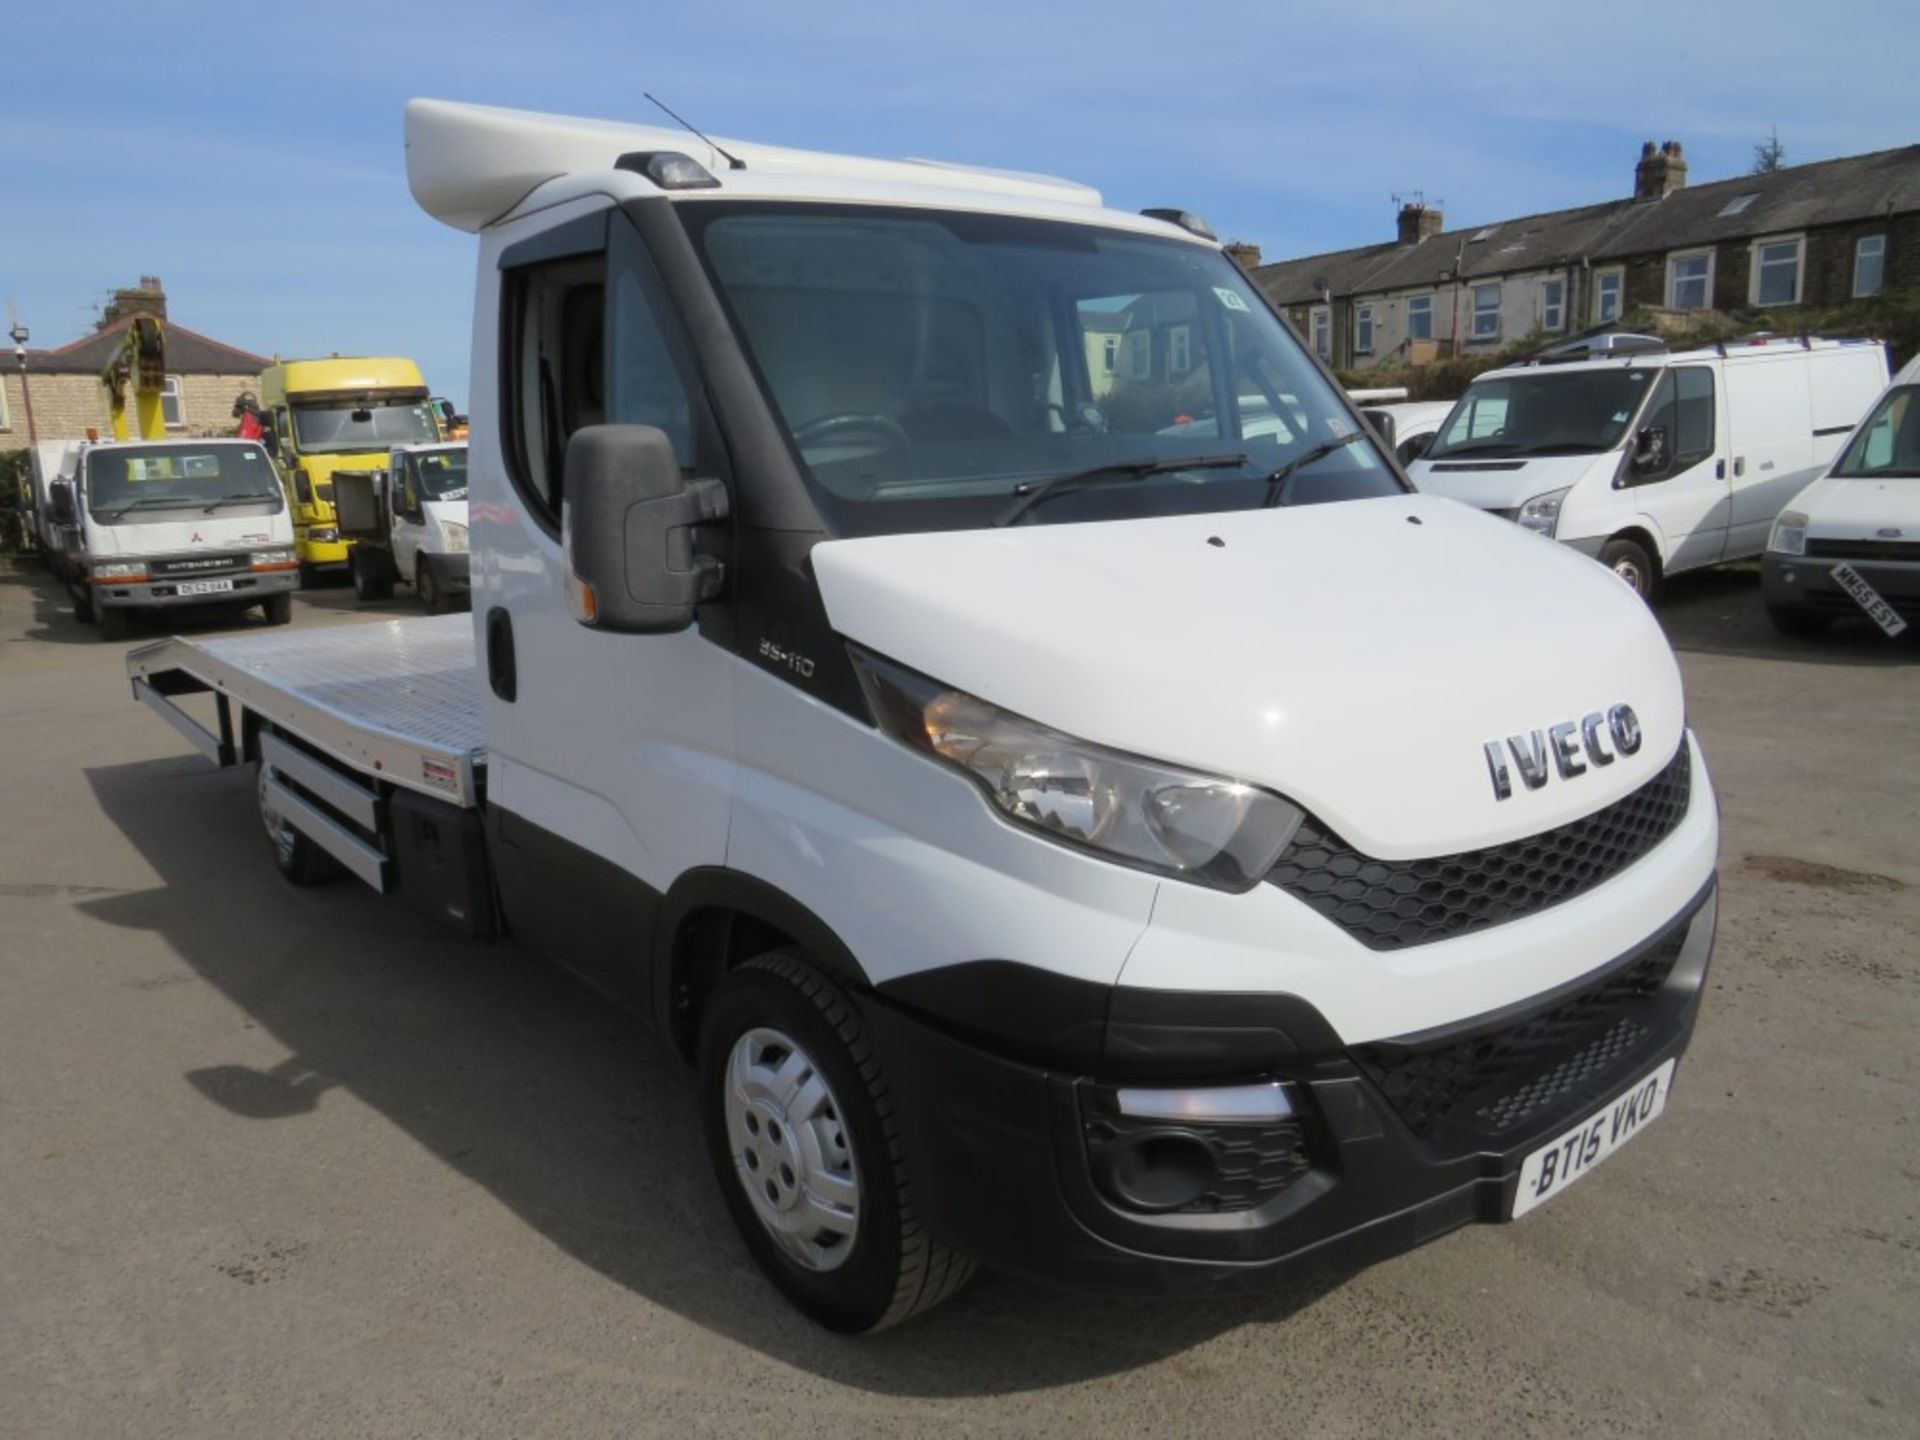 15 reg IVECO DAILY 35S11 RECOVERY TRUCK, 1ST REG 06/15, TEST 05/21, 124014M, V5 HERE, 1 FORMER